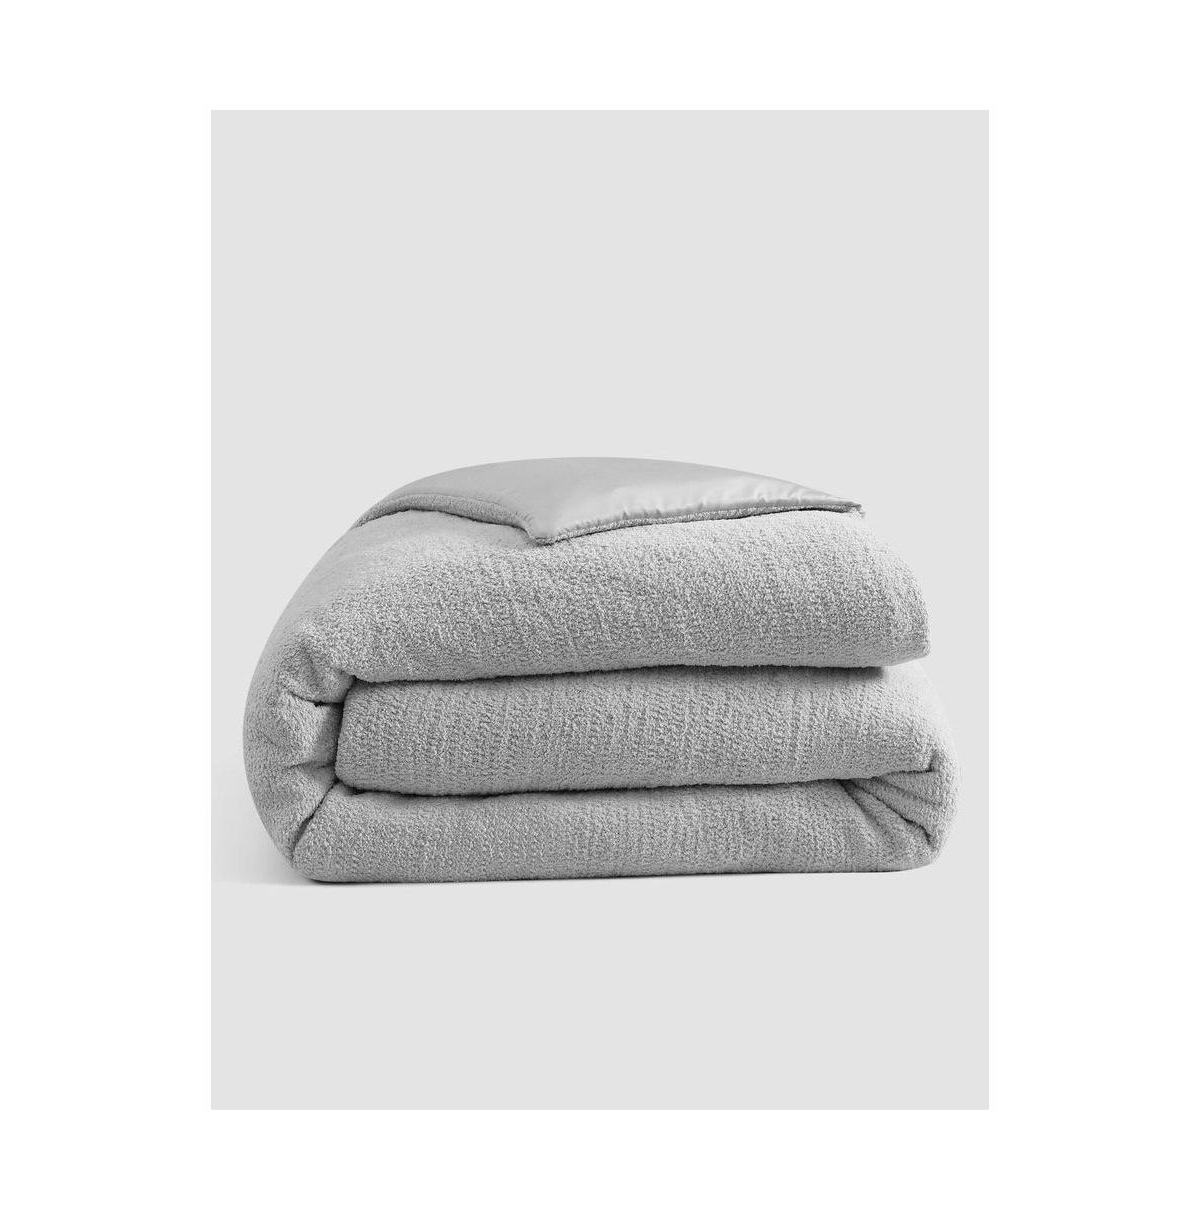 Sunday Citizen Snug Viscose From Bamboo Duvet Cover, Full/queen In Cloud Gray